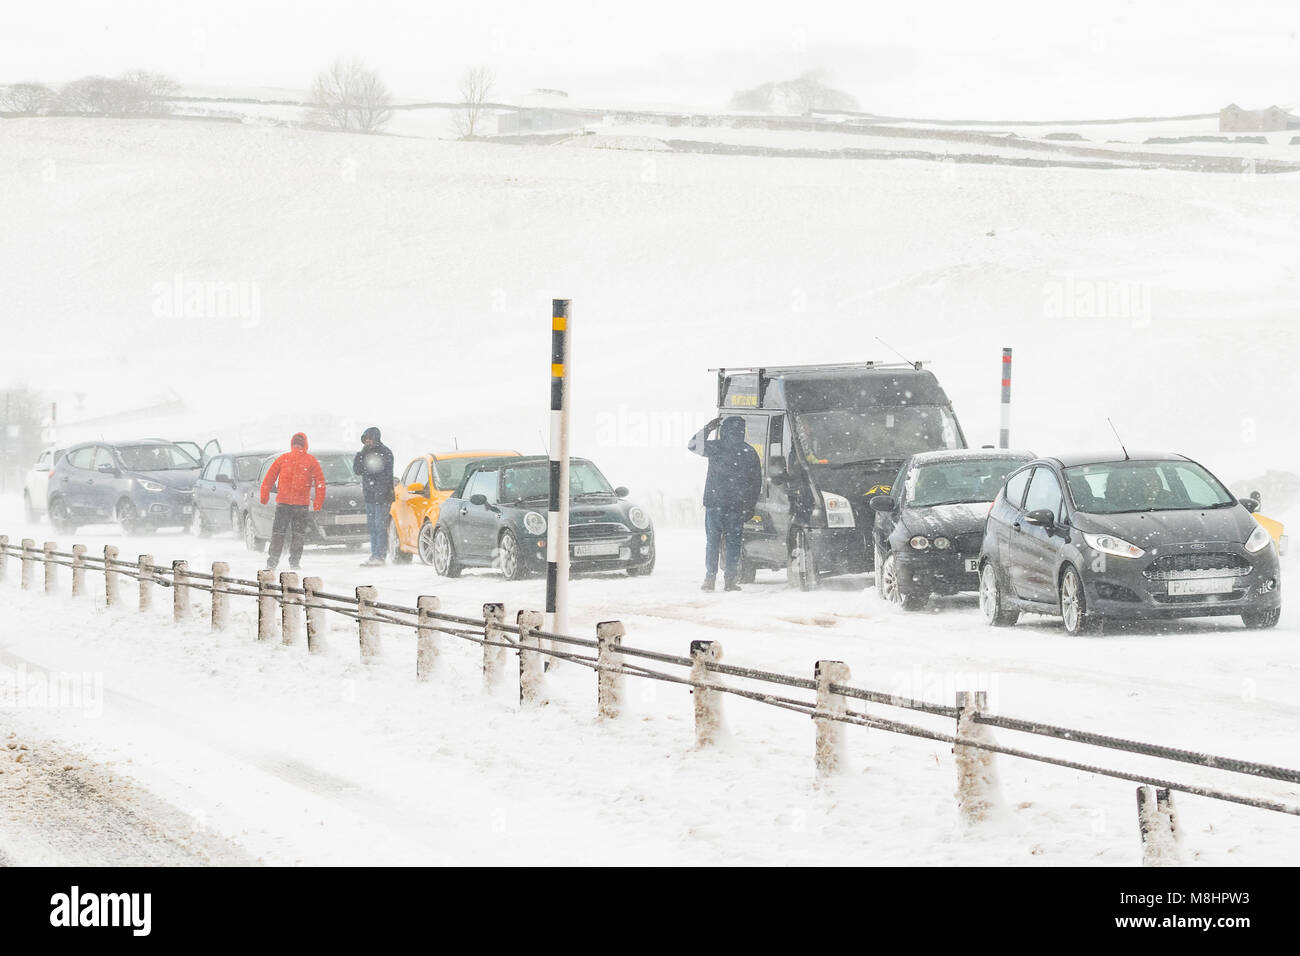 A66, 17 March 2018: UK weather - white out - motorists stuck on A66 trunk road in Cumbria as heavy snow and icy conditions created very difficult driving conditions on the A66.  There were multiple accidents and long tailbacks in both directions Credit: Kay Roxby/Alamy Live News Stock Photo